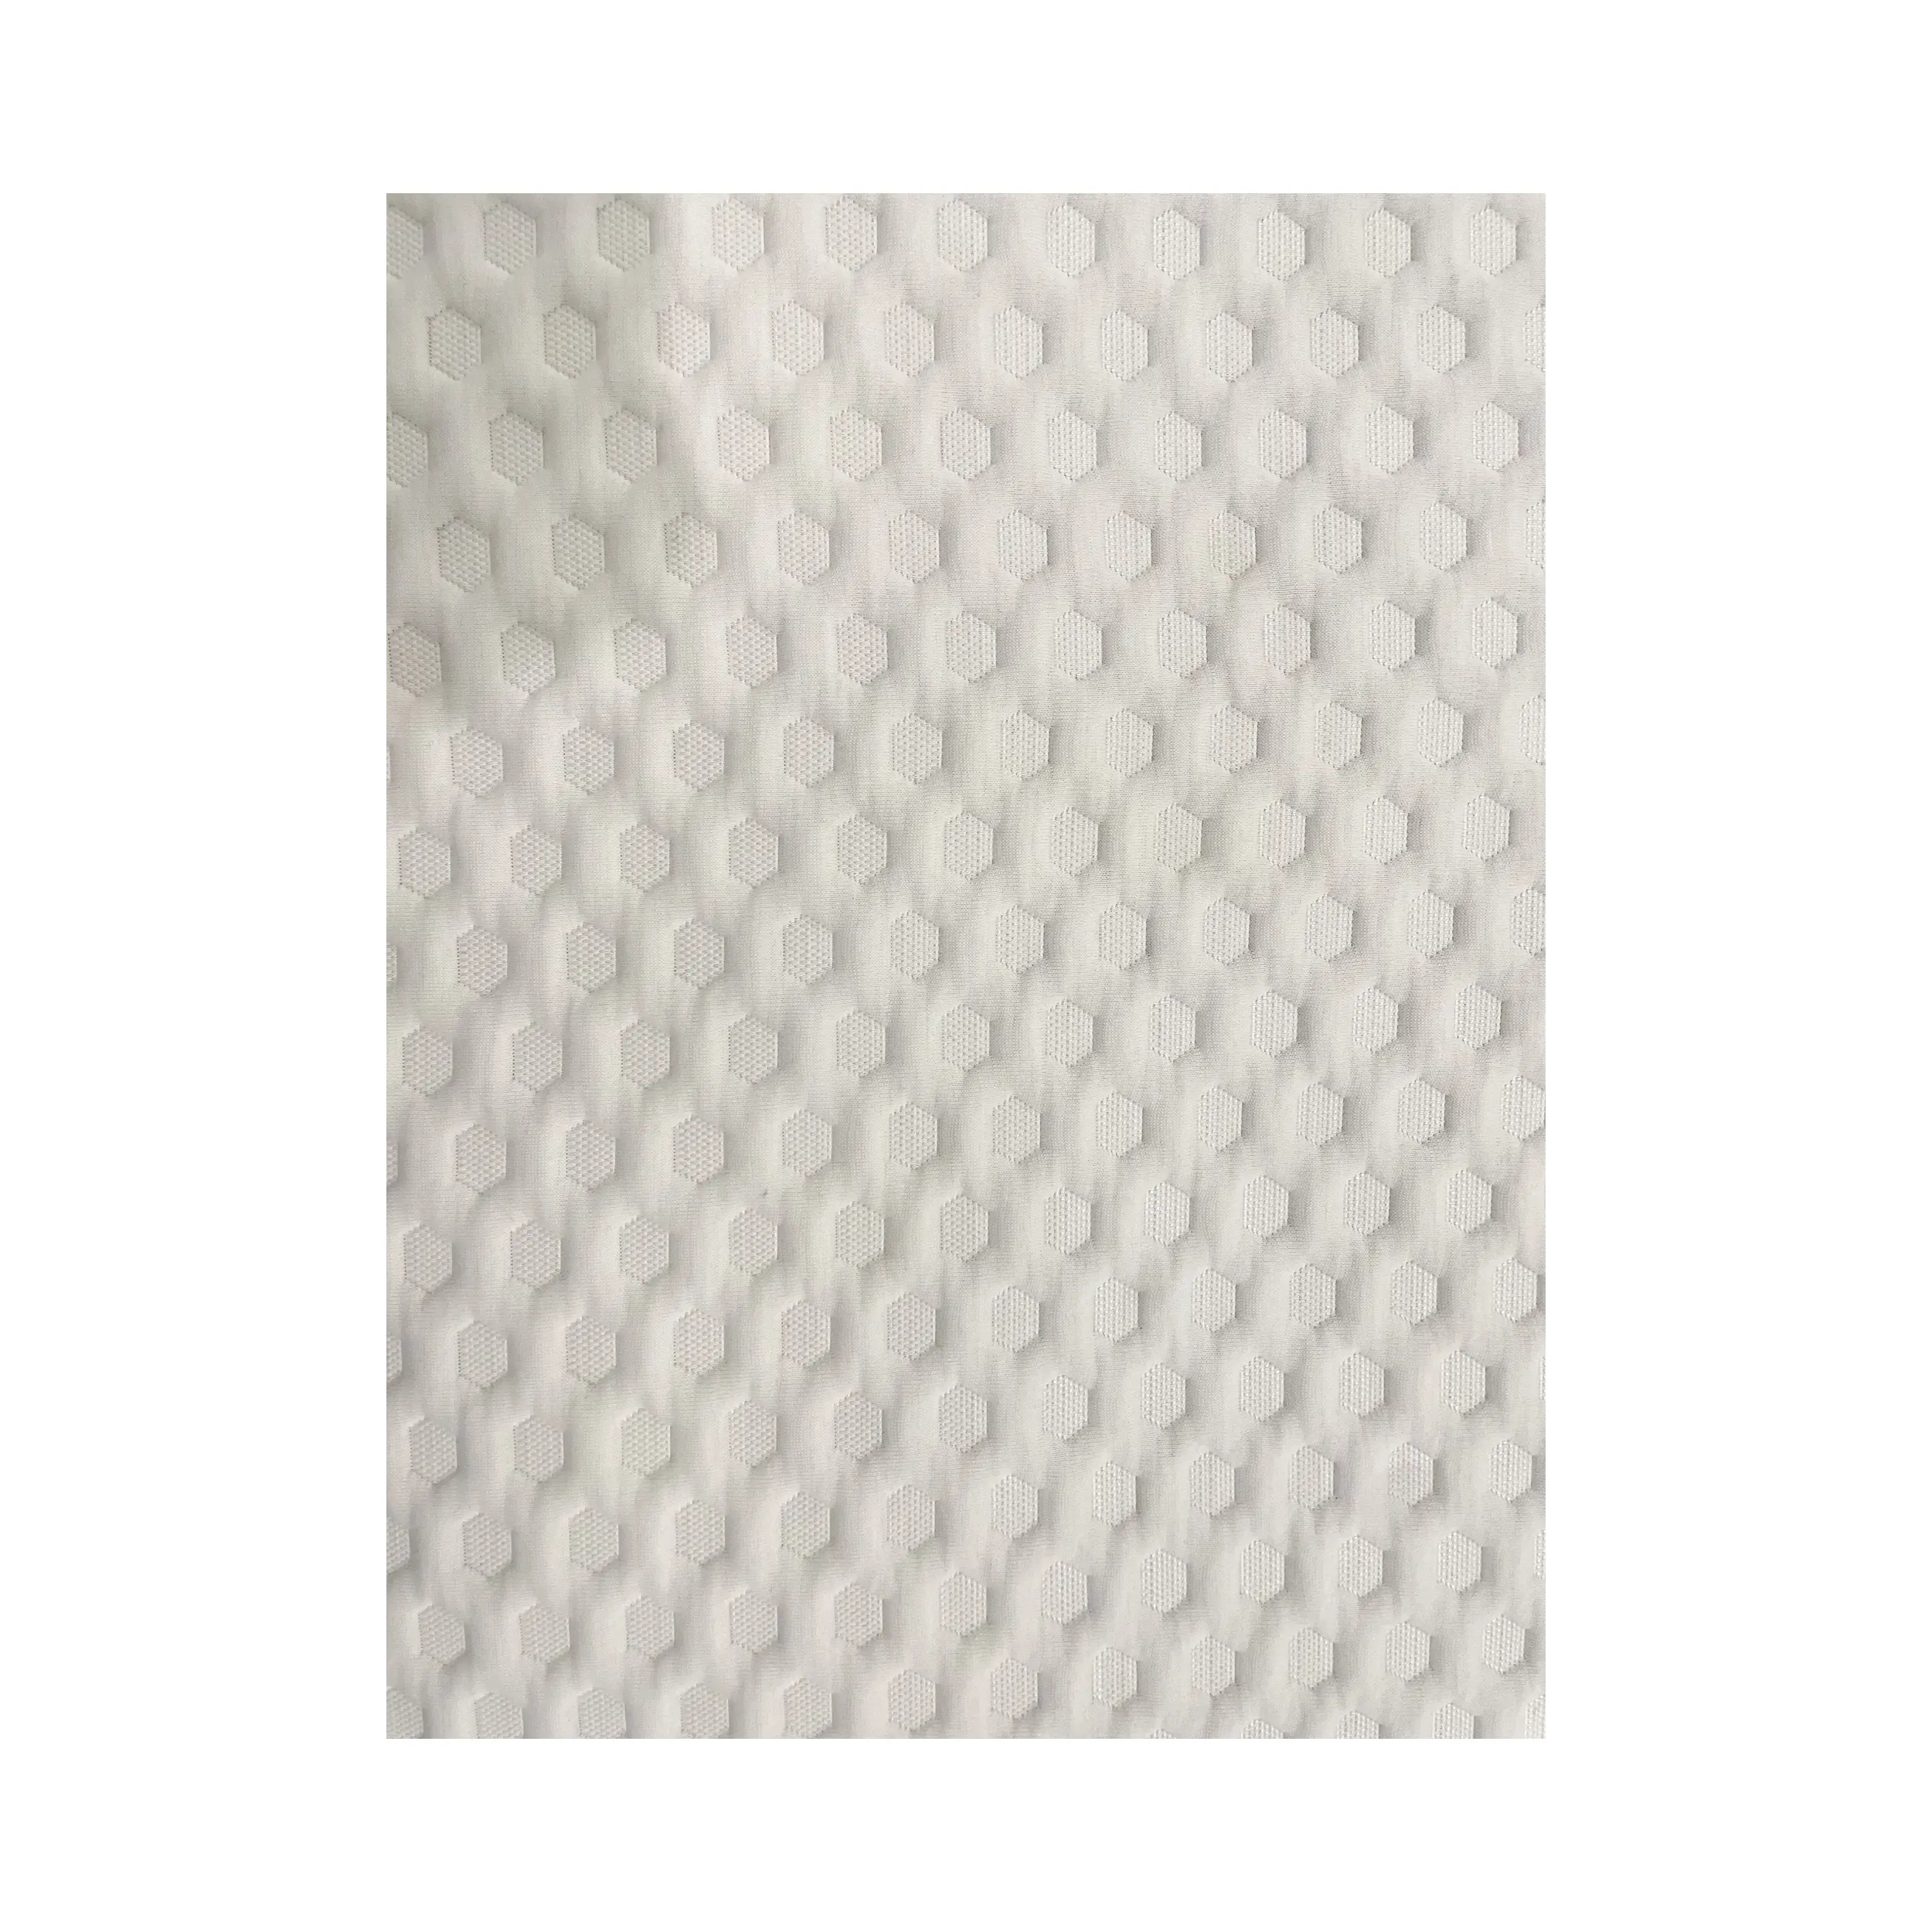 4%Spandex 96%Polyester Factory Wholesale Price White Bedding Mattress Fabric